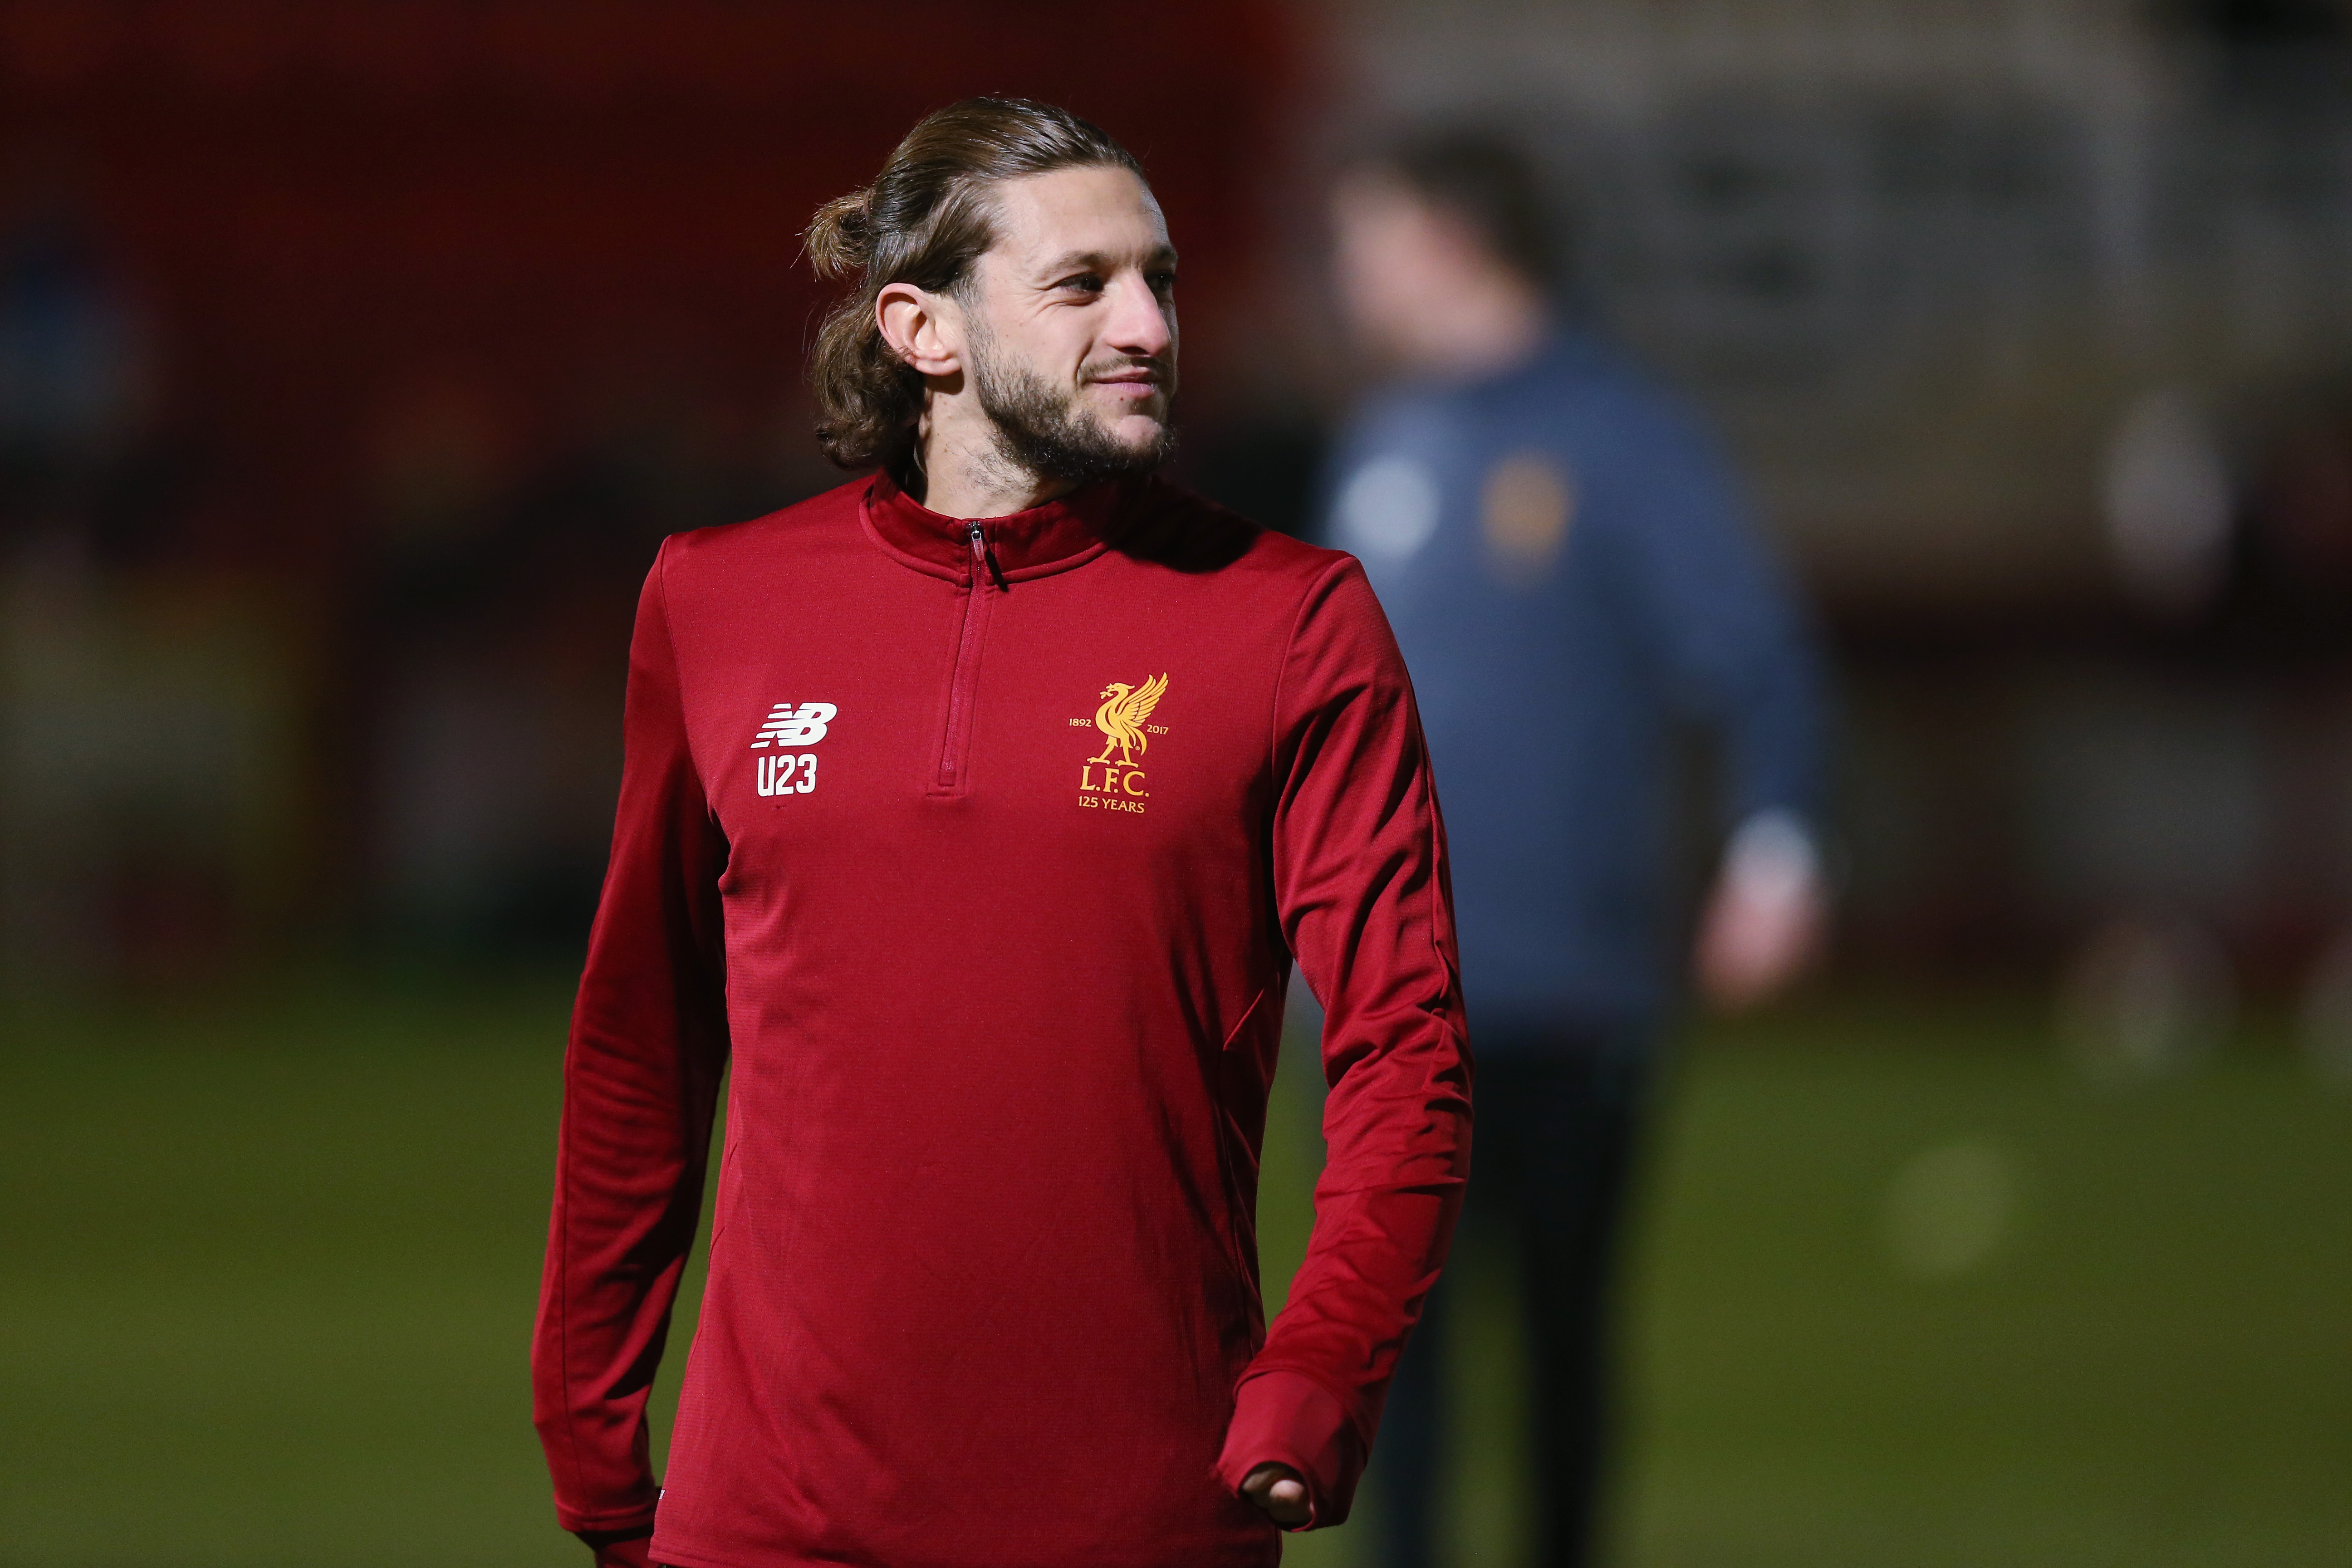 STEVENAGE, ENGLAND - FEBRUARY 05:  Adam Lallana of Liverpool warms up prior to the Premier League 2 match between Tottenham Hotspur and Liverpool at The Lamex Stadium on February 5, 2018 in Stevenage, England.  (Photo by Alex Morton/Getty Images)